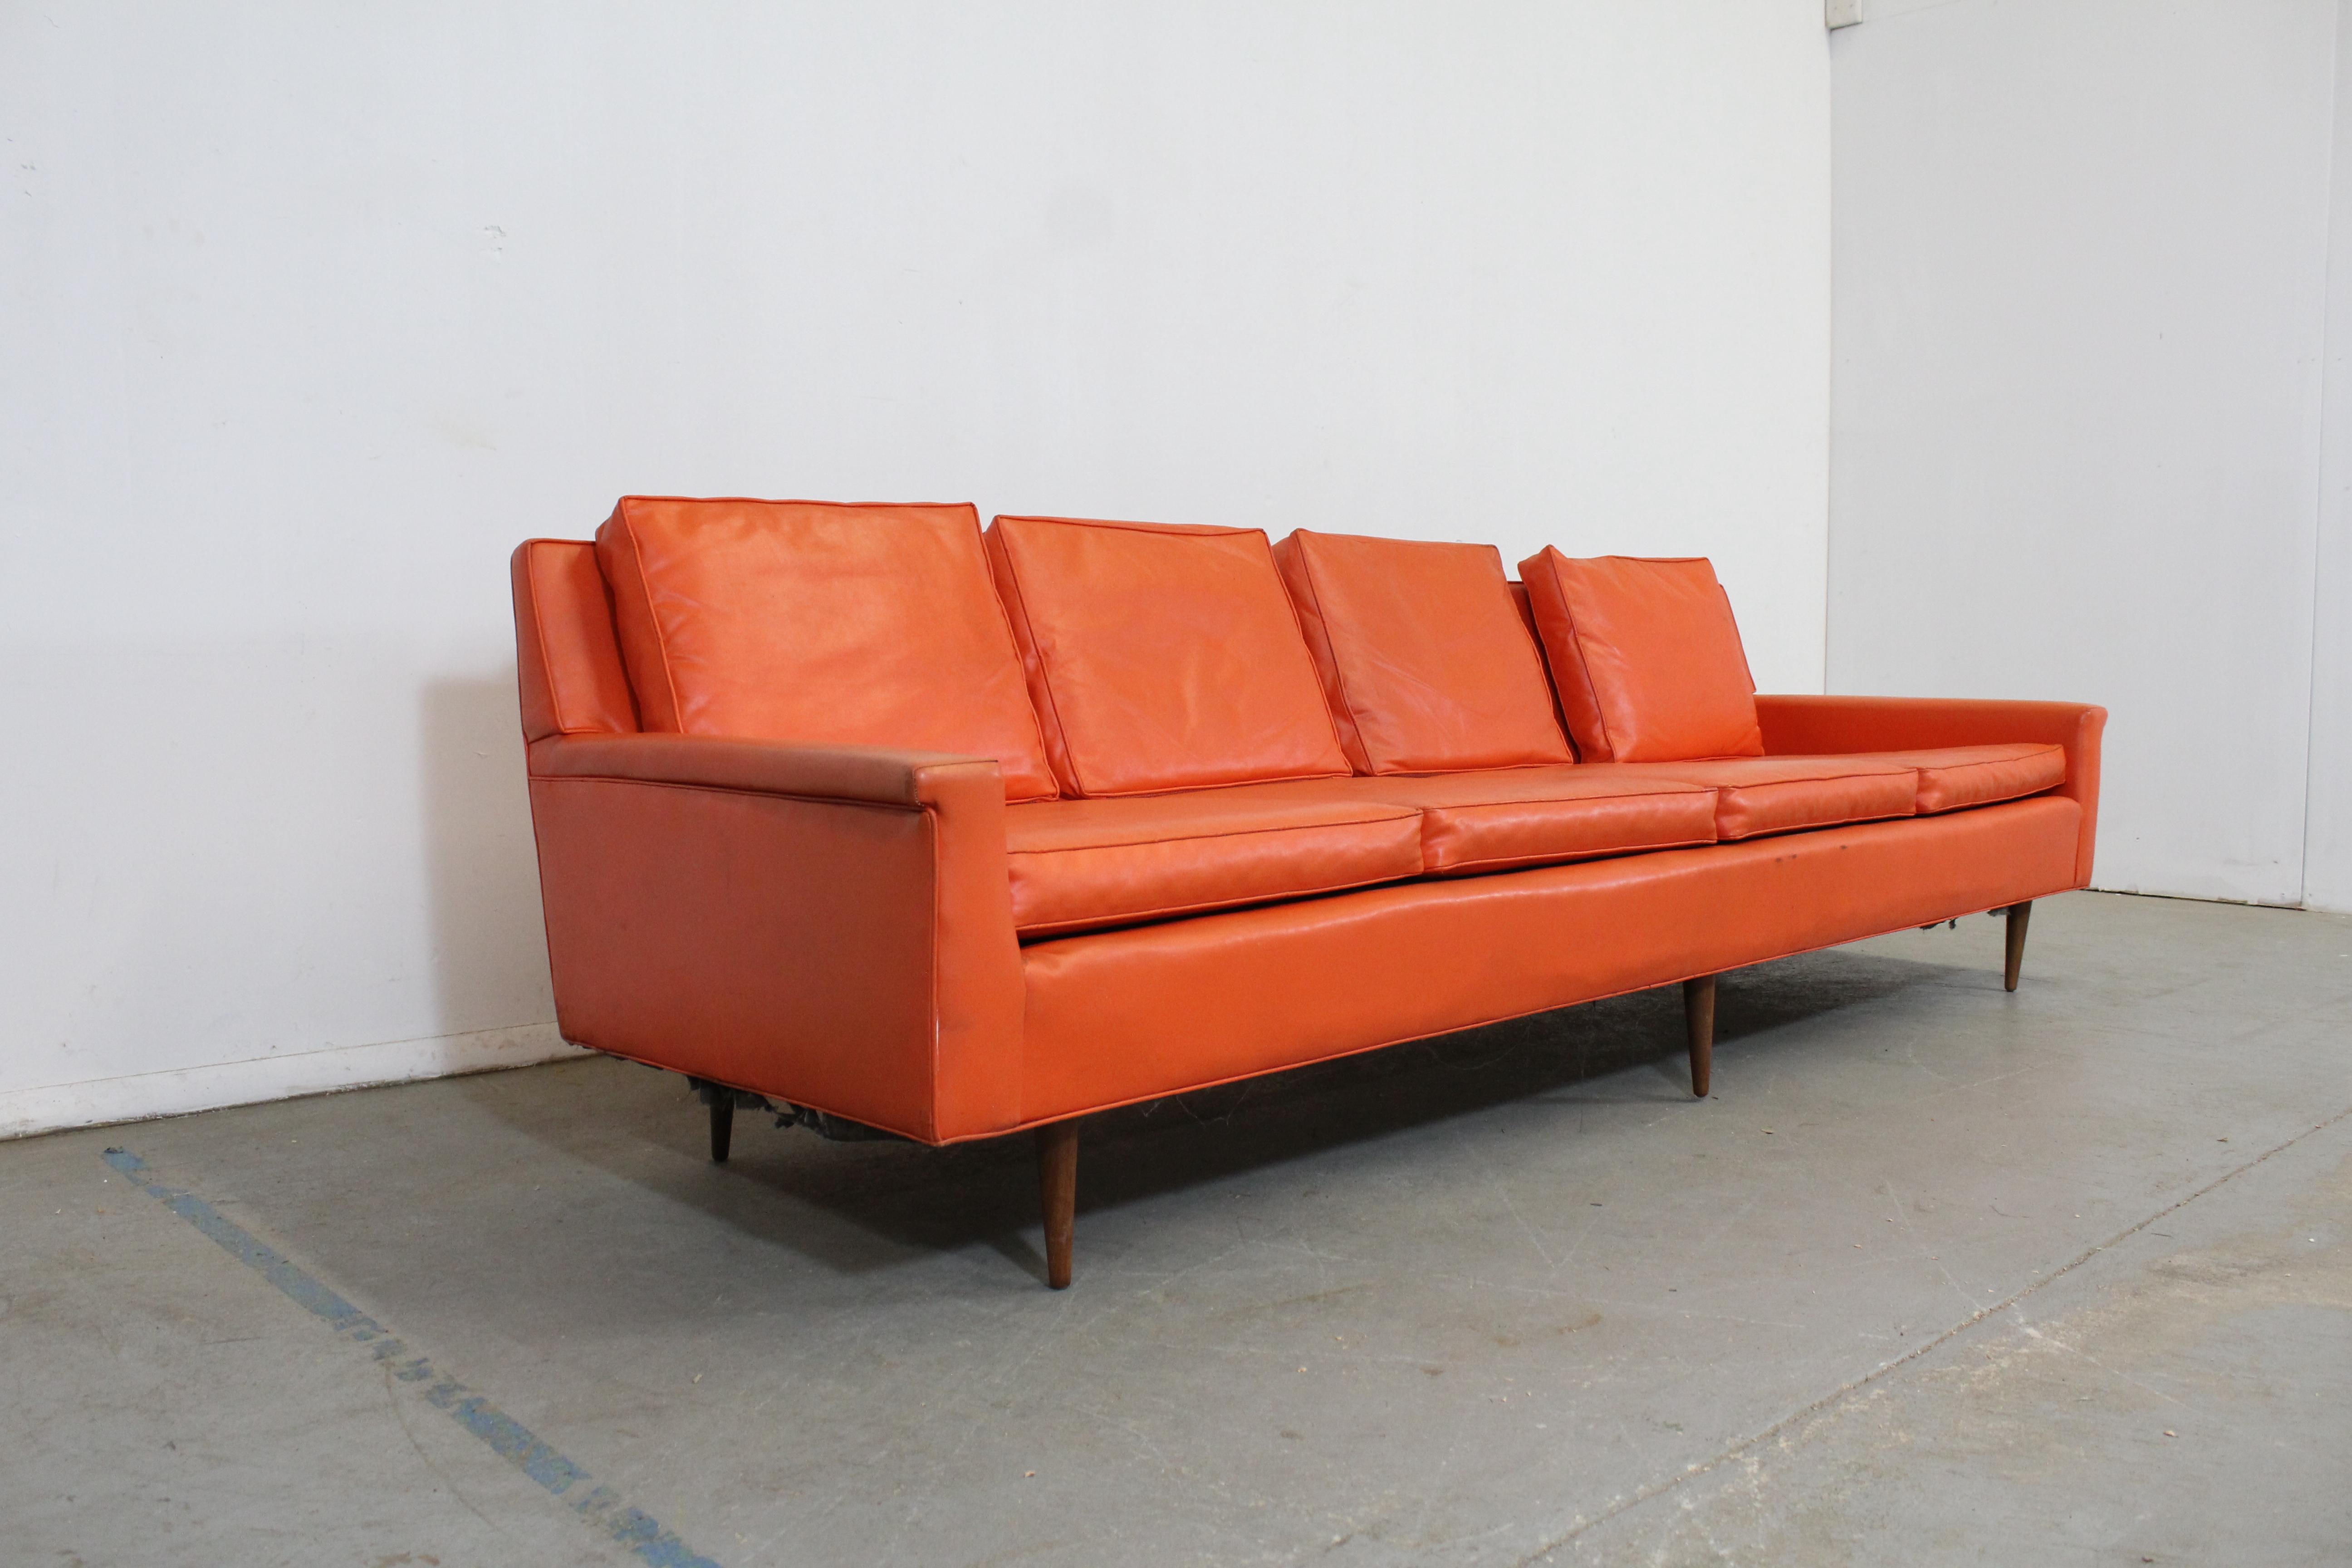 Mid-Century Elongated Orange  Sofa Milo Baughman Thayer Coggin 

Offered is an unrestored Mid-Century Modern sofa  by Milo Baughman for Thayer Coggin. This sofa is very rare. The sofa needs to be reupholstered but it is overall structurally sound.